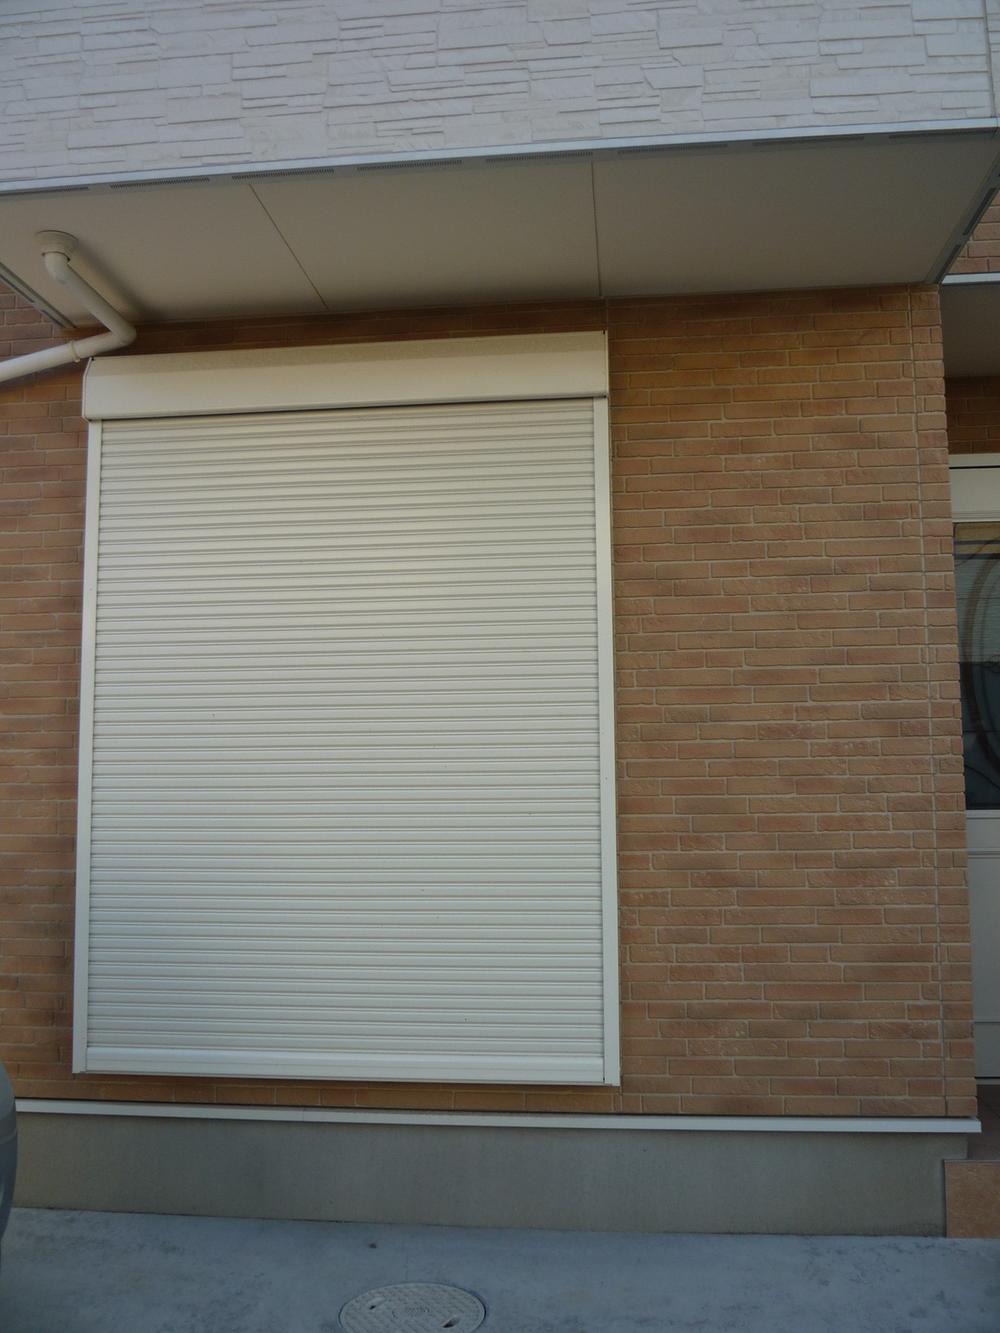 Same specifications photos (Other introspection). The first floor of the shutter shutters